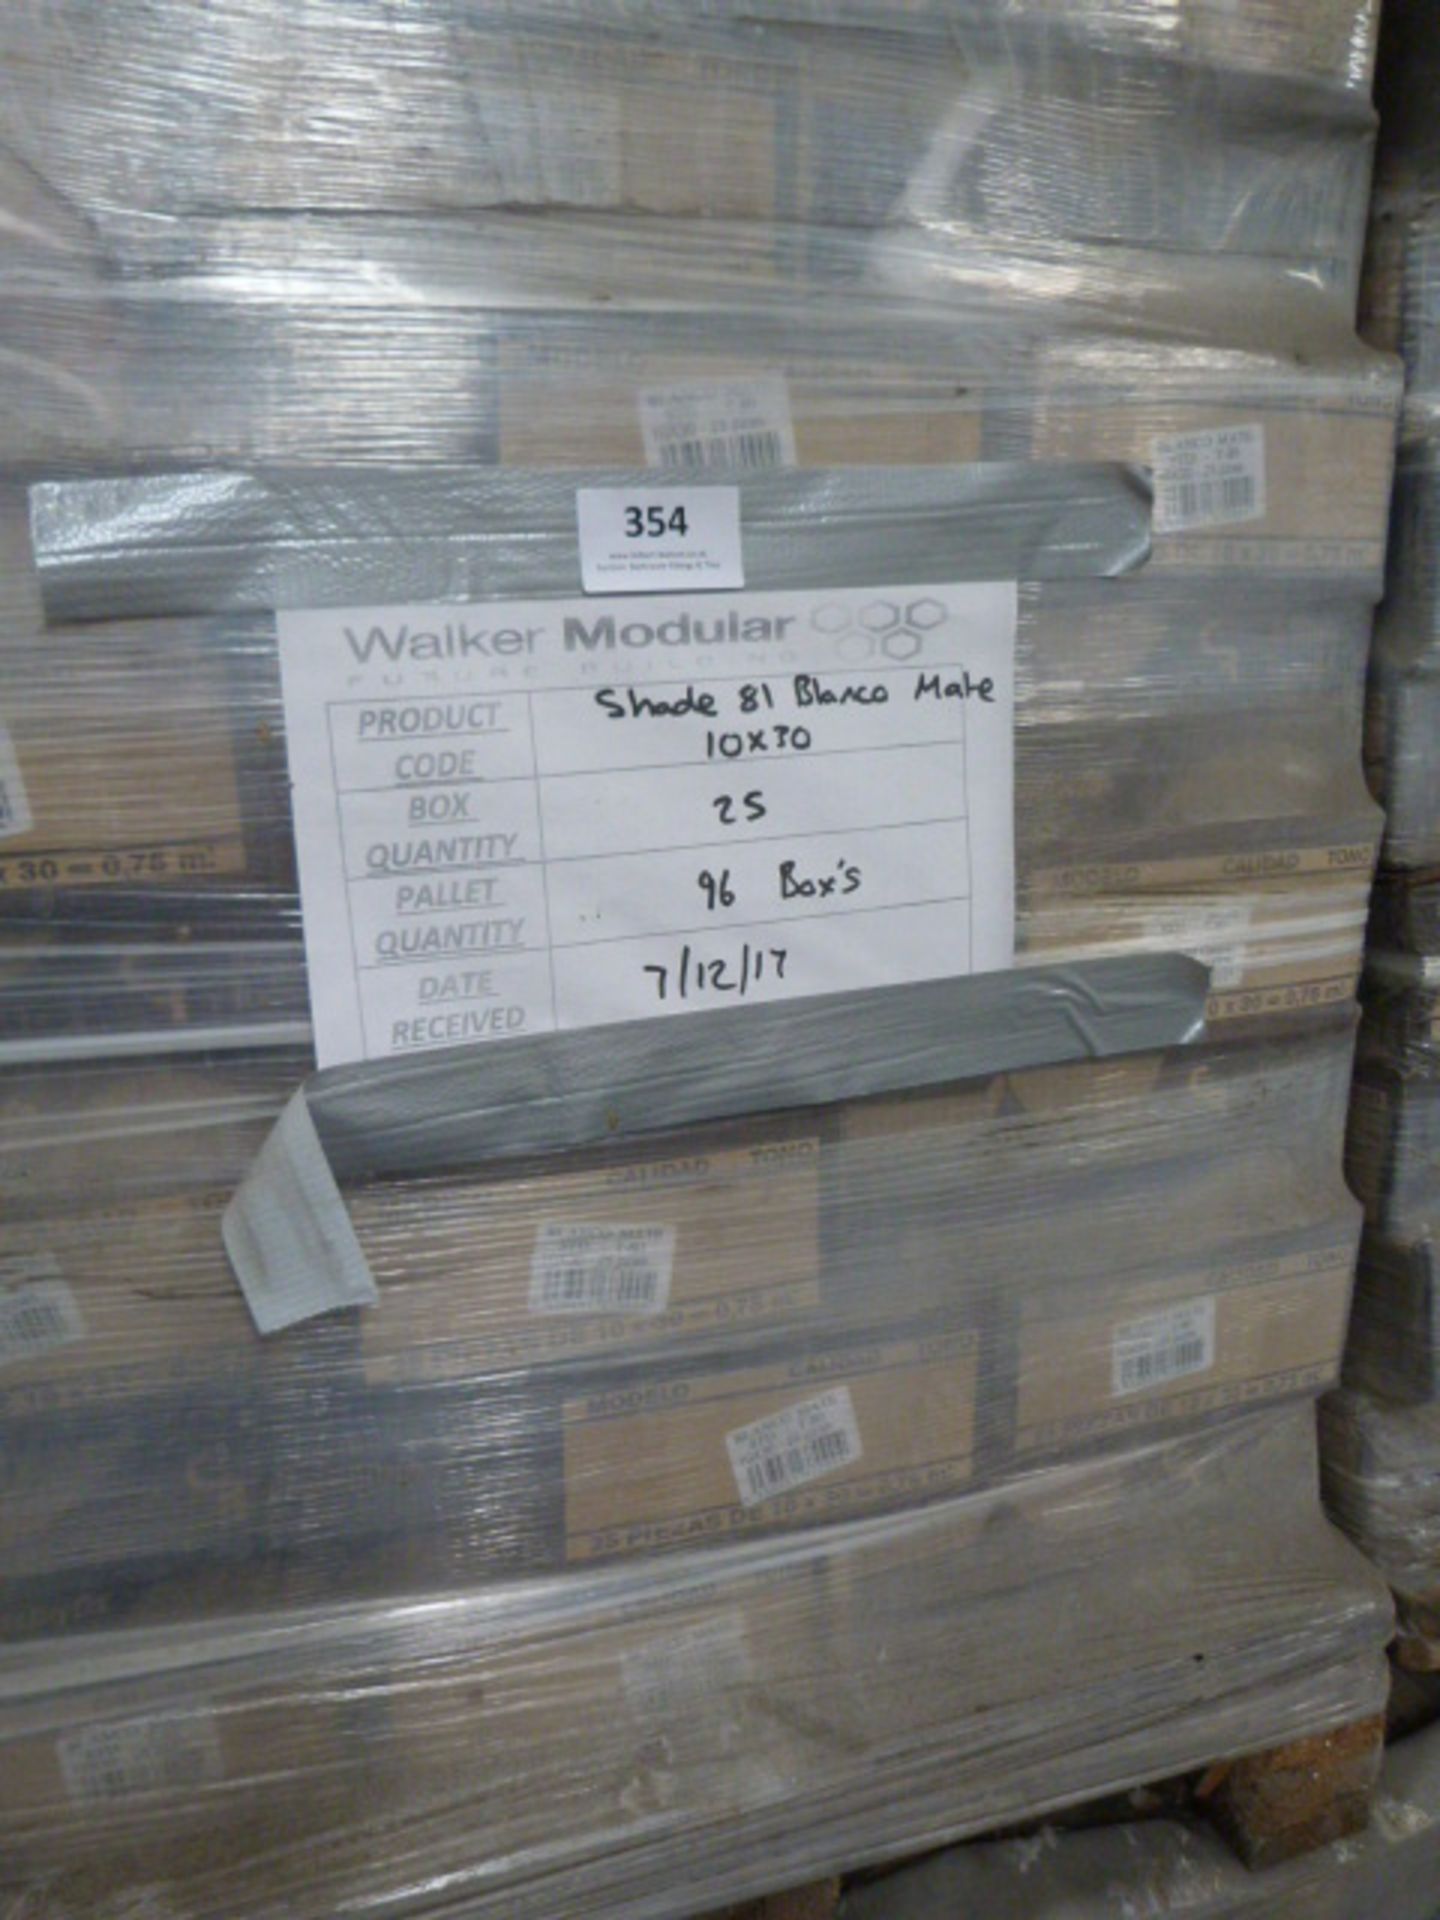 *96 Boxes of Bianco Mate 10 by 30 Ceramic Tiles